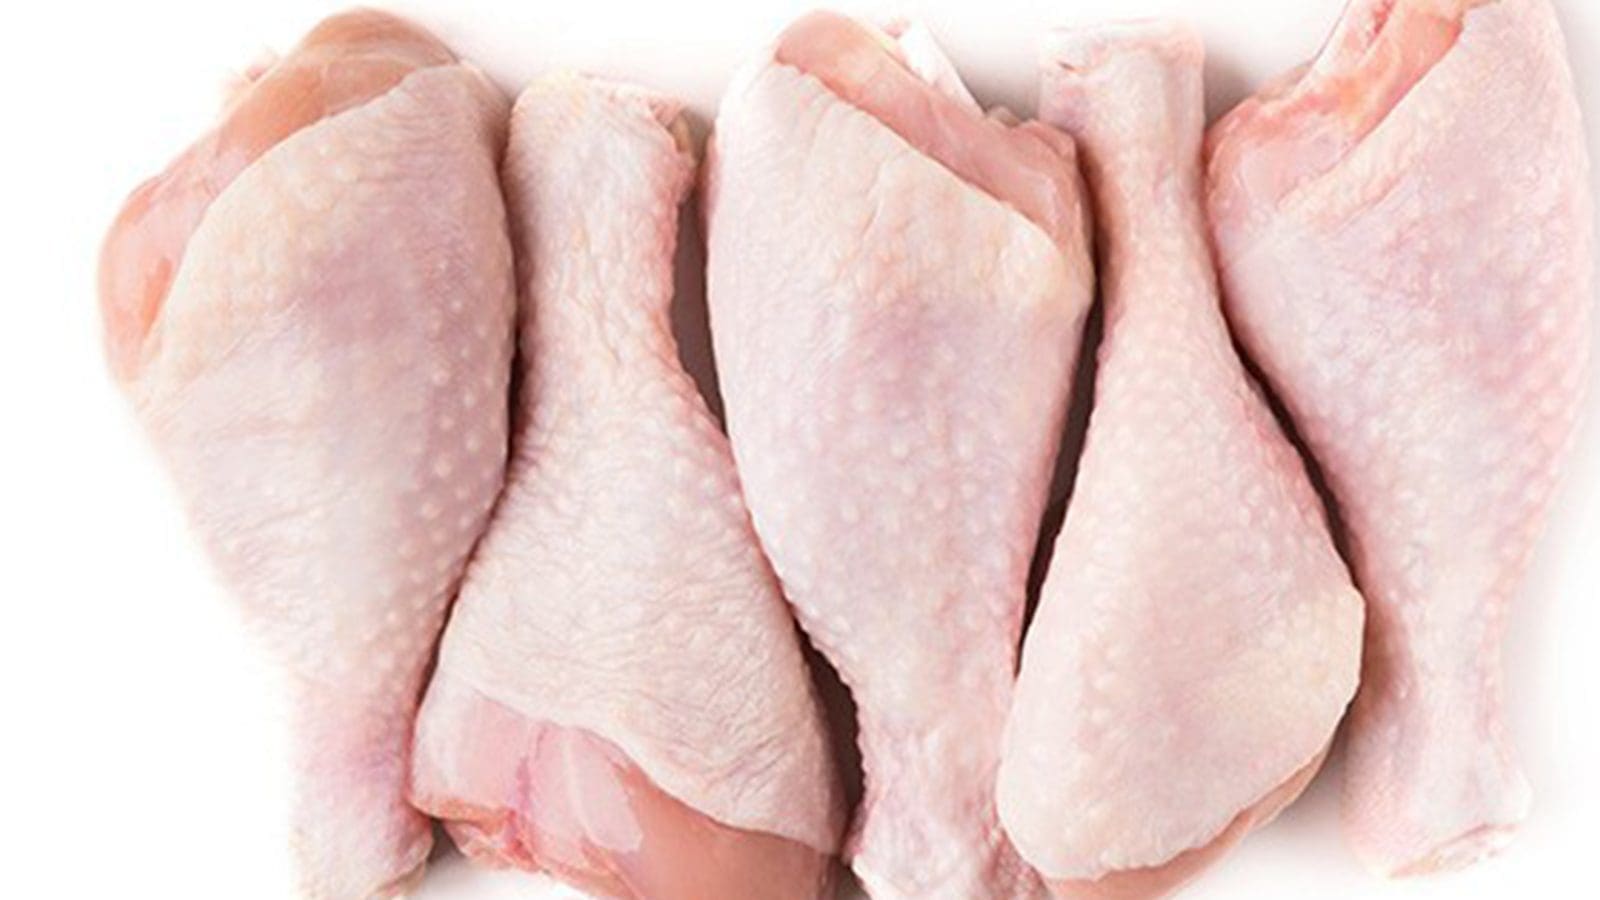 Researchers collaborate to work on salmonella reduction strategies in raw poultry